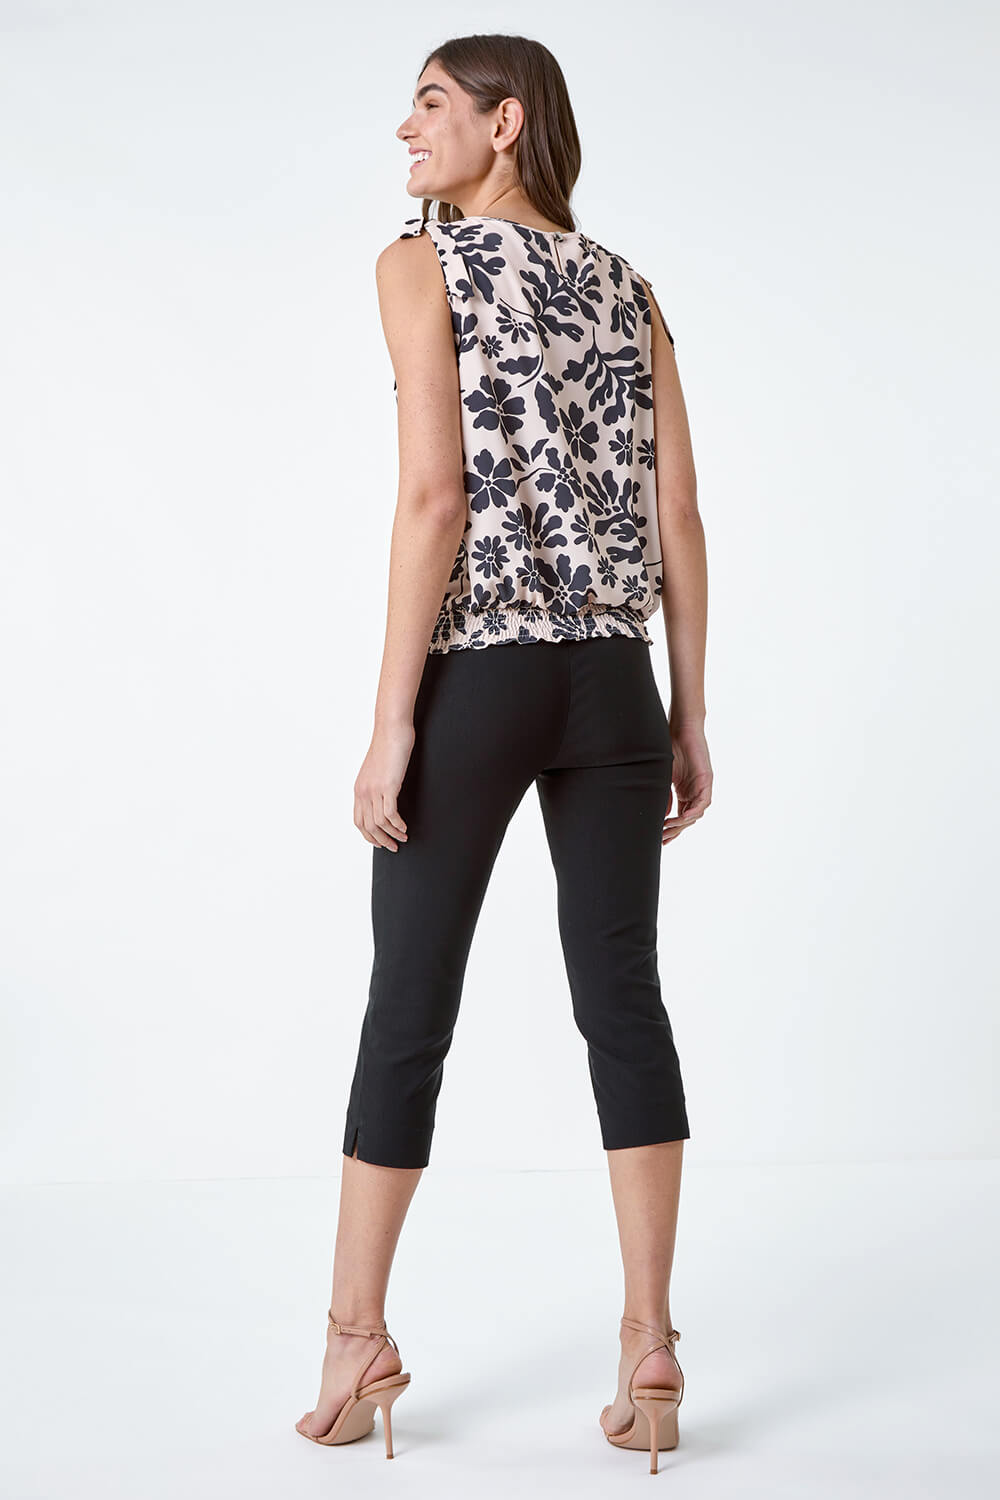 Black Bow Detail Floral Shirred Top, Image 3 of 5